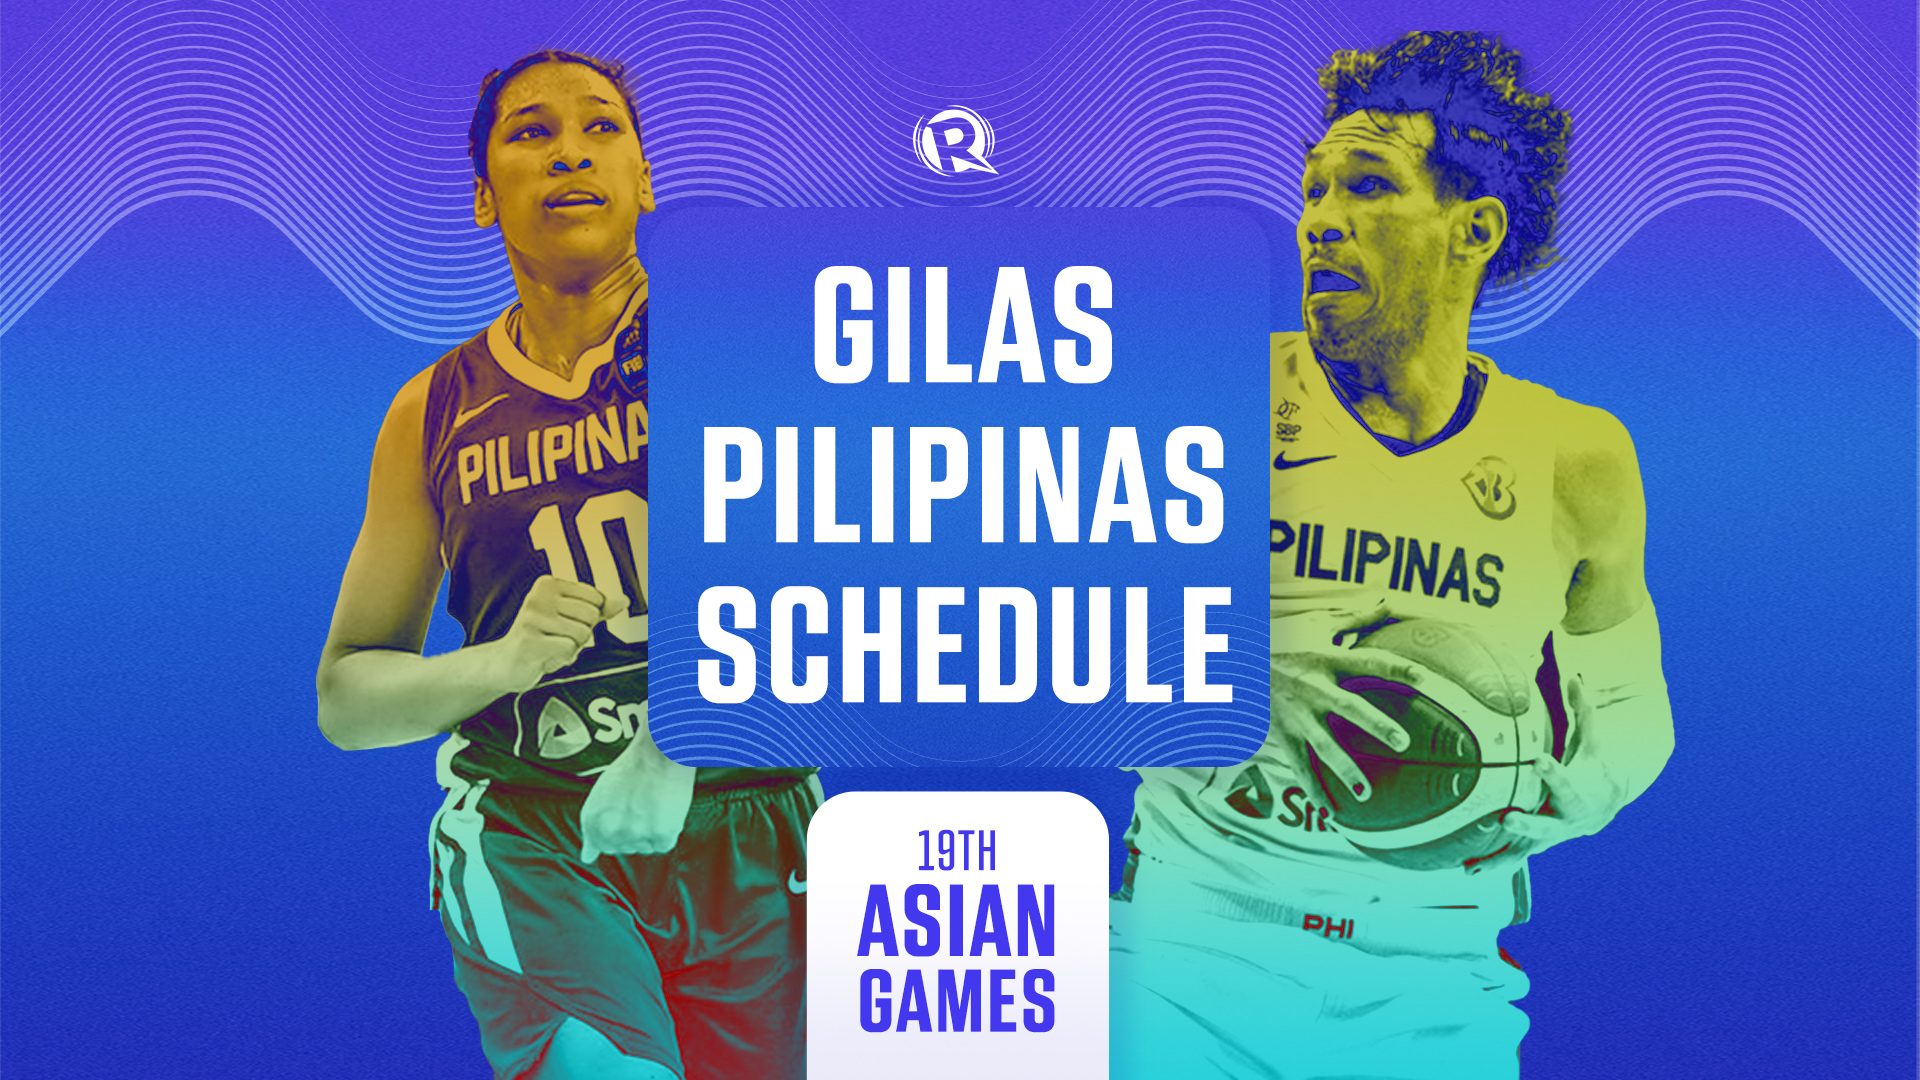 GAME SCHEDULE Gilas Pilipinas at 19th Asian Games